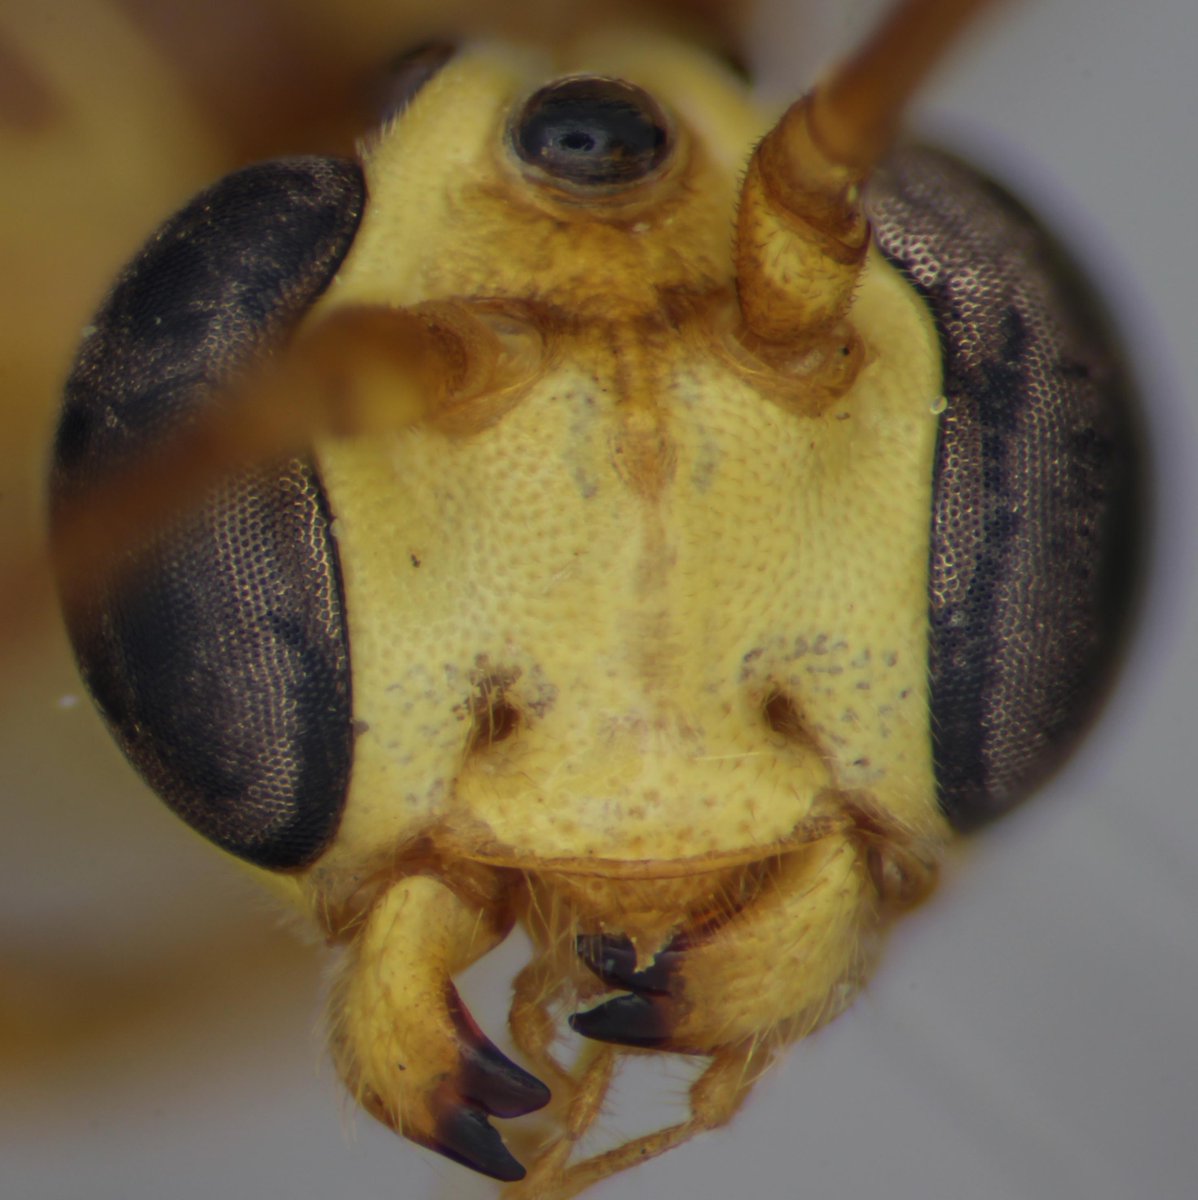 Enicospilus also have very narrow mandibles. Compare Enicospilus repentinus (left, or top) with Ophion minutus.